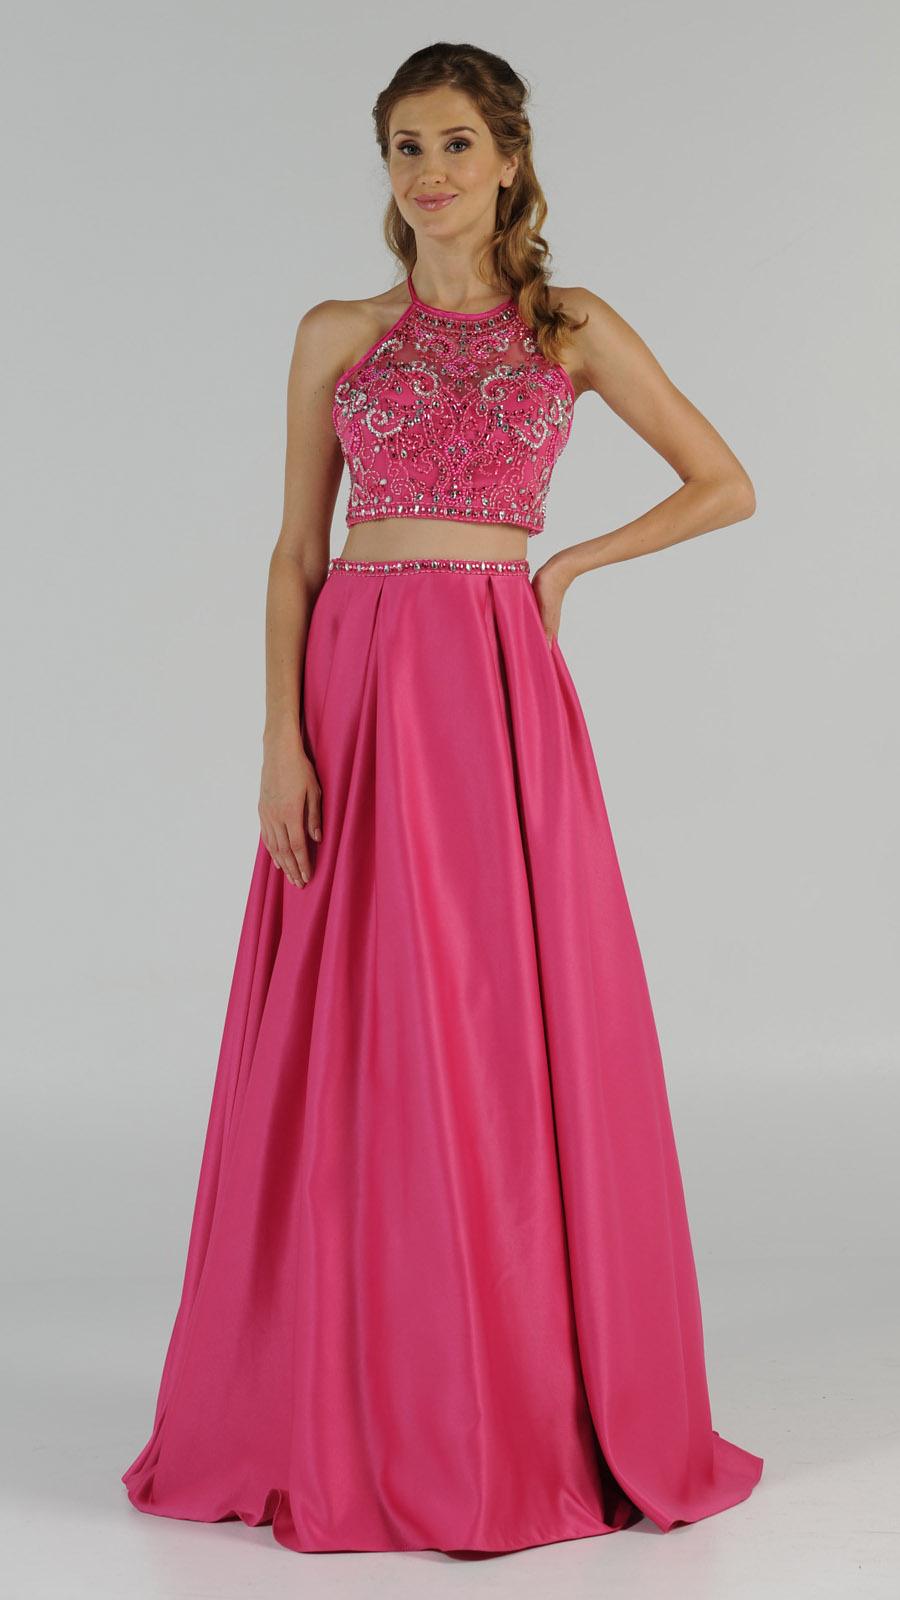 Hot Pink Two-Piece Long Prom Dress Satin Skirt with Pockets